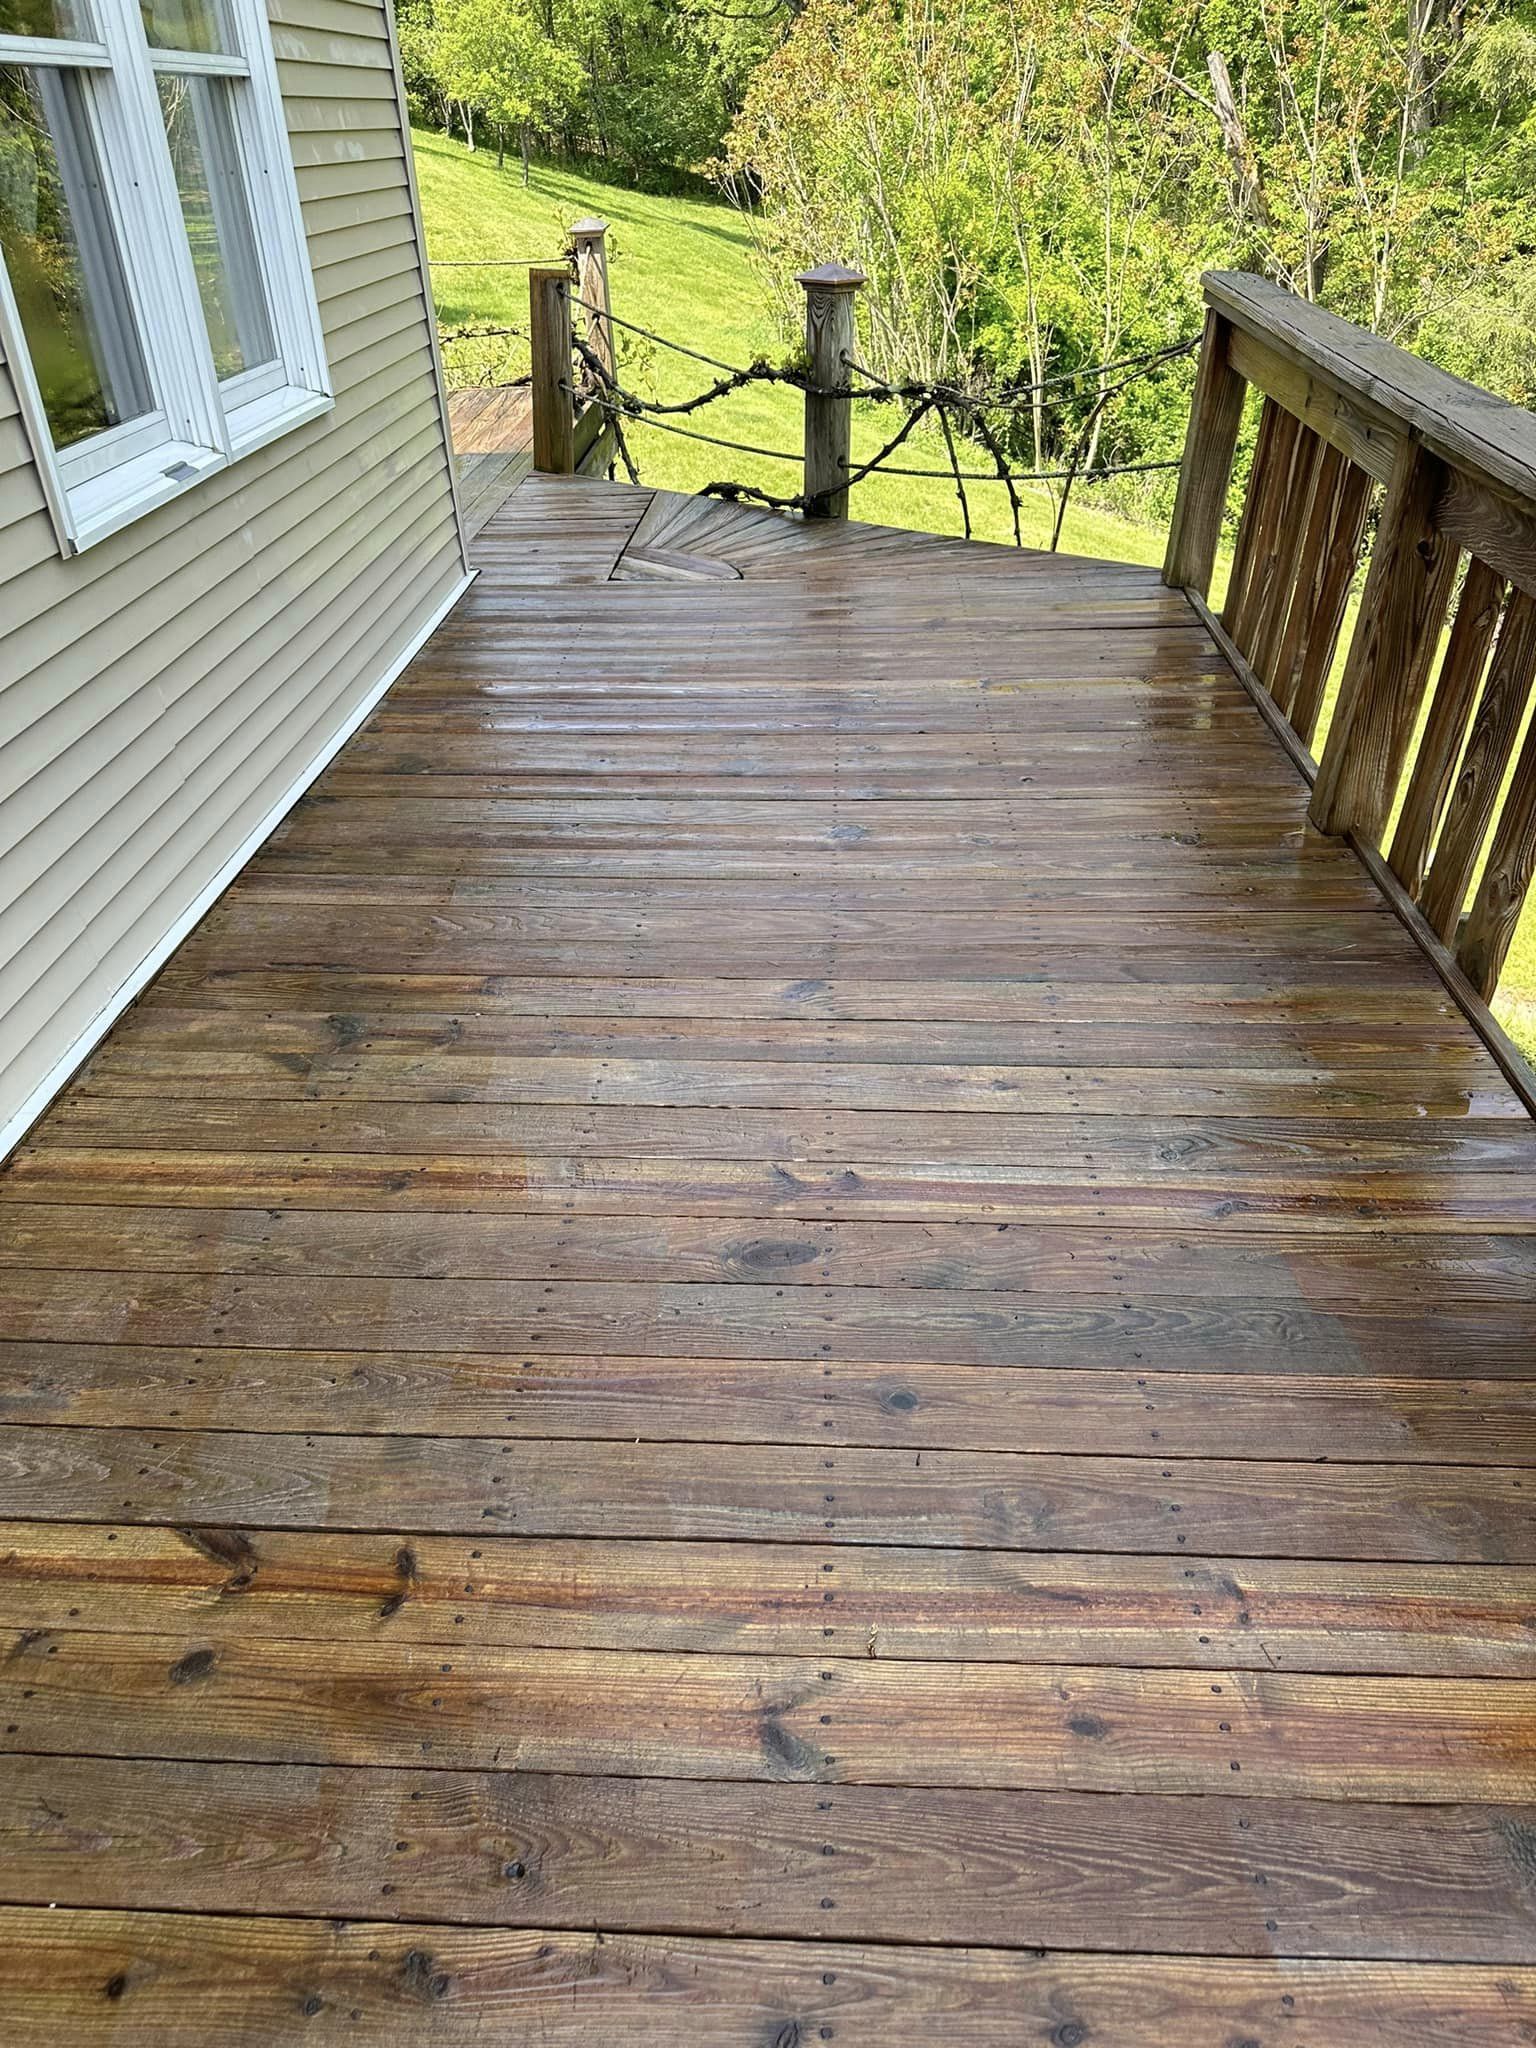 Expert pressure washing services for fence and deck cleaning in Lewisburg PA by NextGen Power Wash LLC